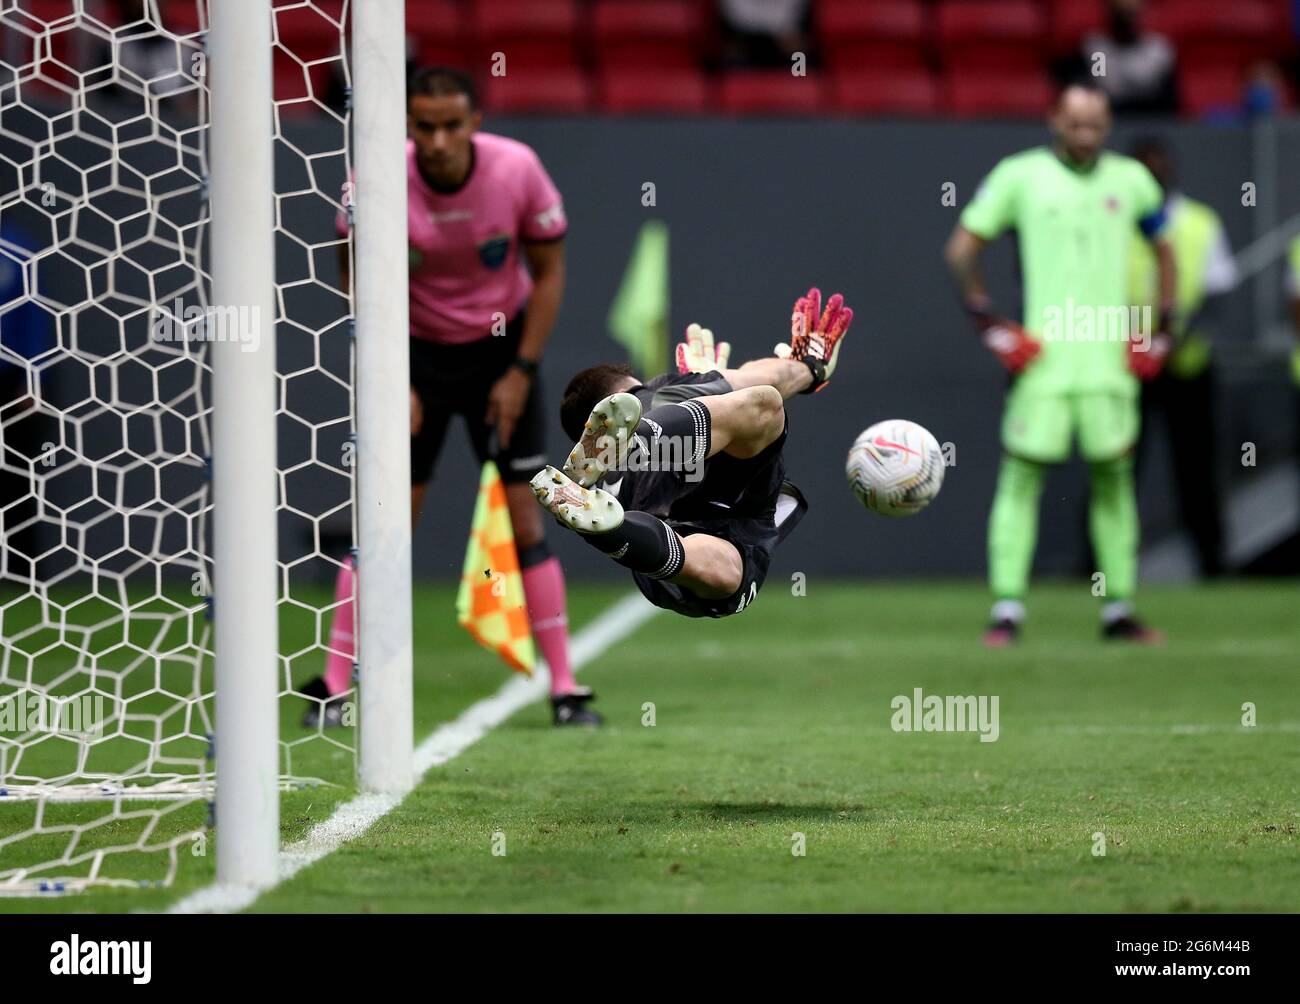 BRASILIA, BRAZIL - JULY 06: Emiliano Martinez Goalkeeper of Argentina dives to save a penalty kick by Yerry Mina of Colombia (not in frame) in a shootout ,after a the Semifinal match between Argentina and Colombia as part of Conmebol Copa America Brazil 2021 at Mane Garrincha Stadium on July 6, 2021 in Brasilia, Brazil. (MB Media) Stock Photo